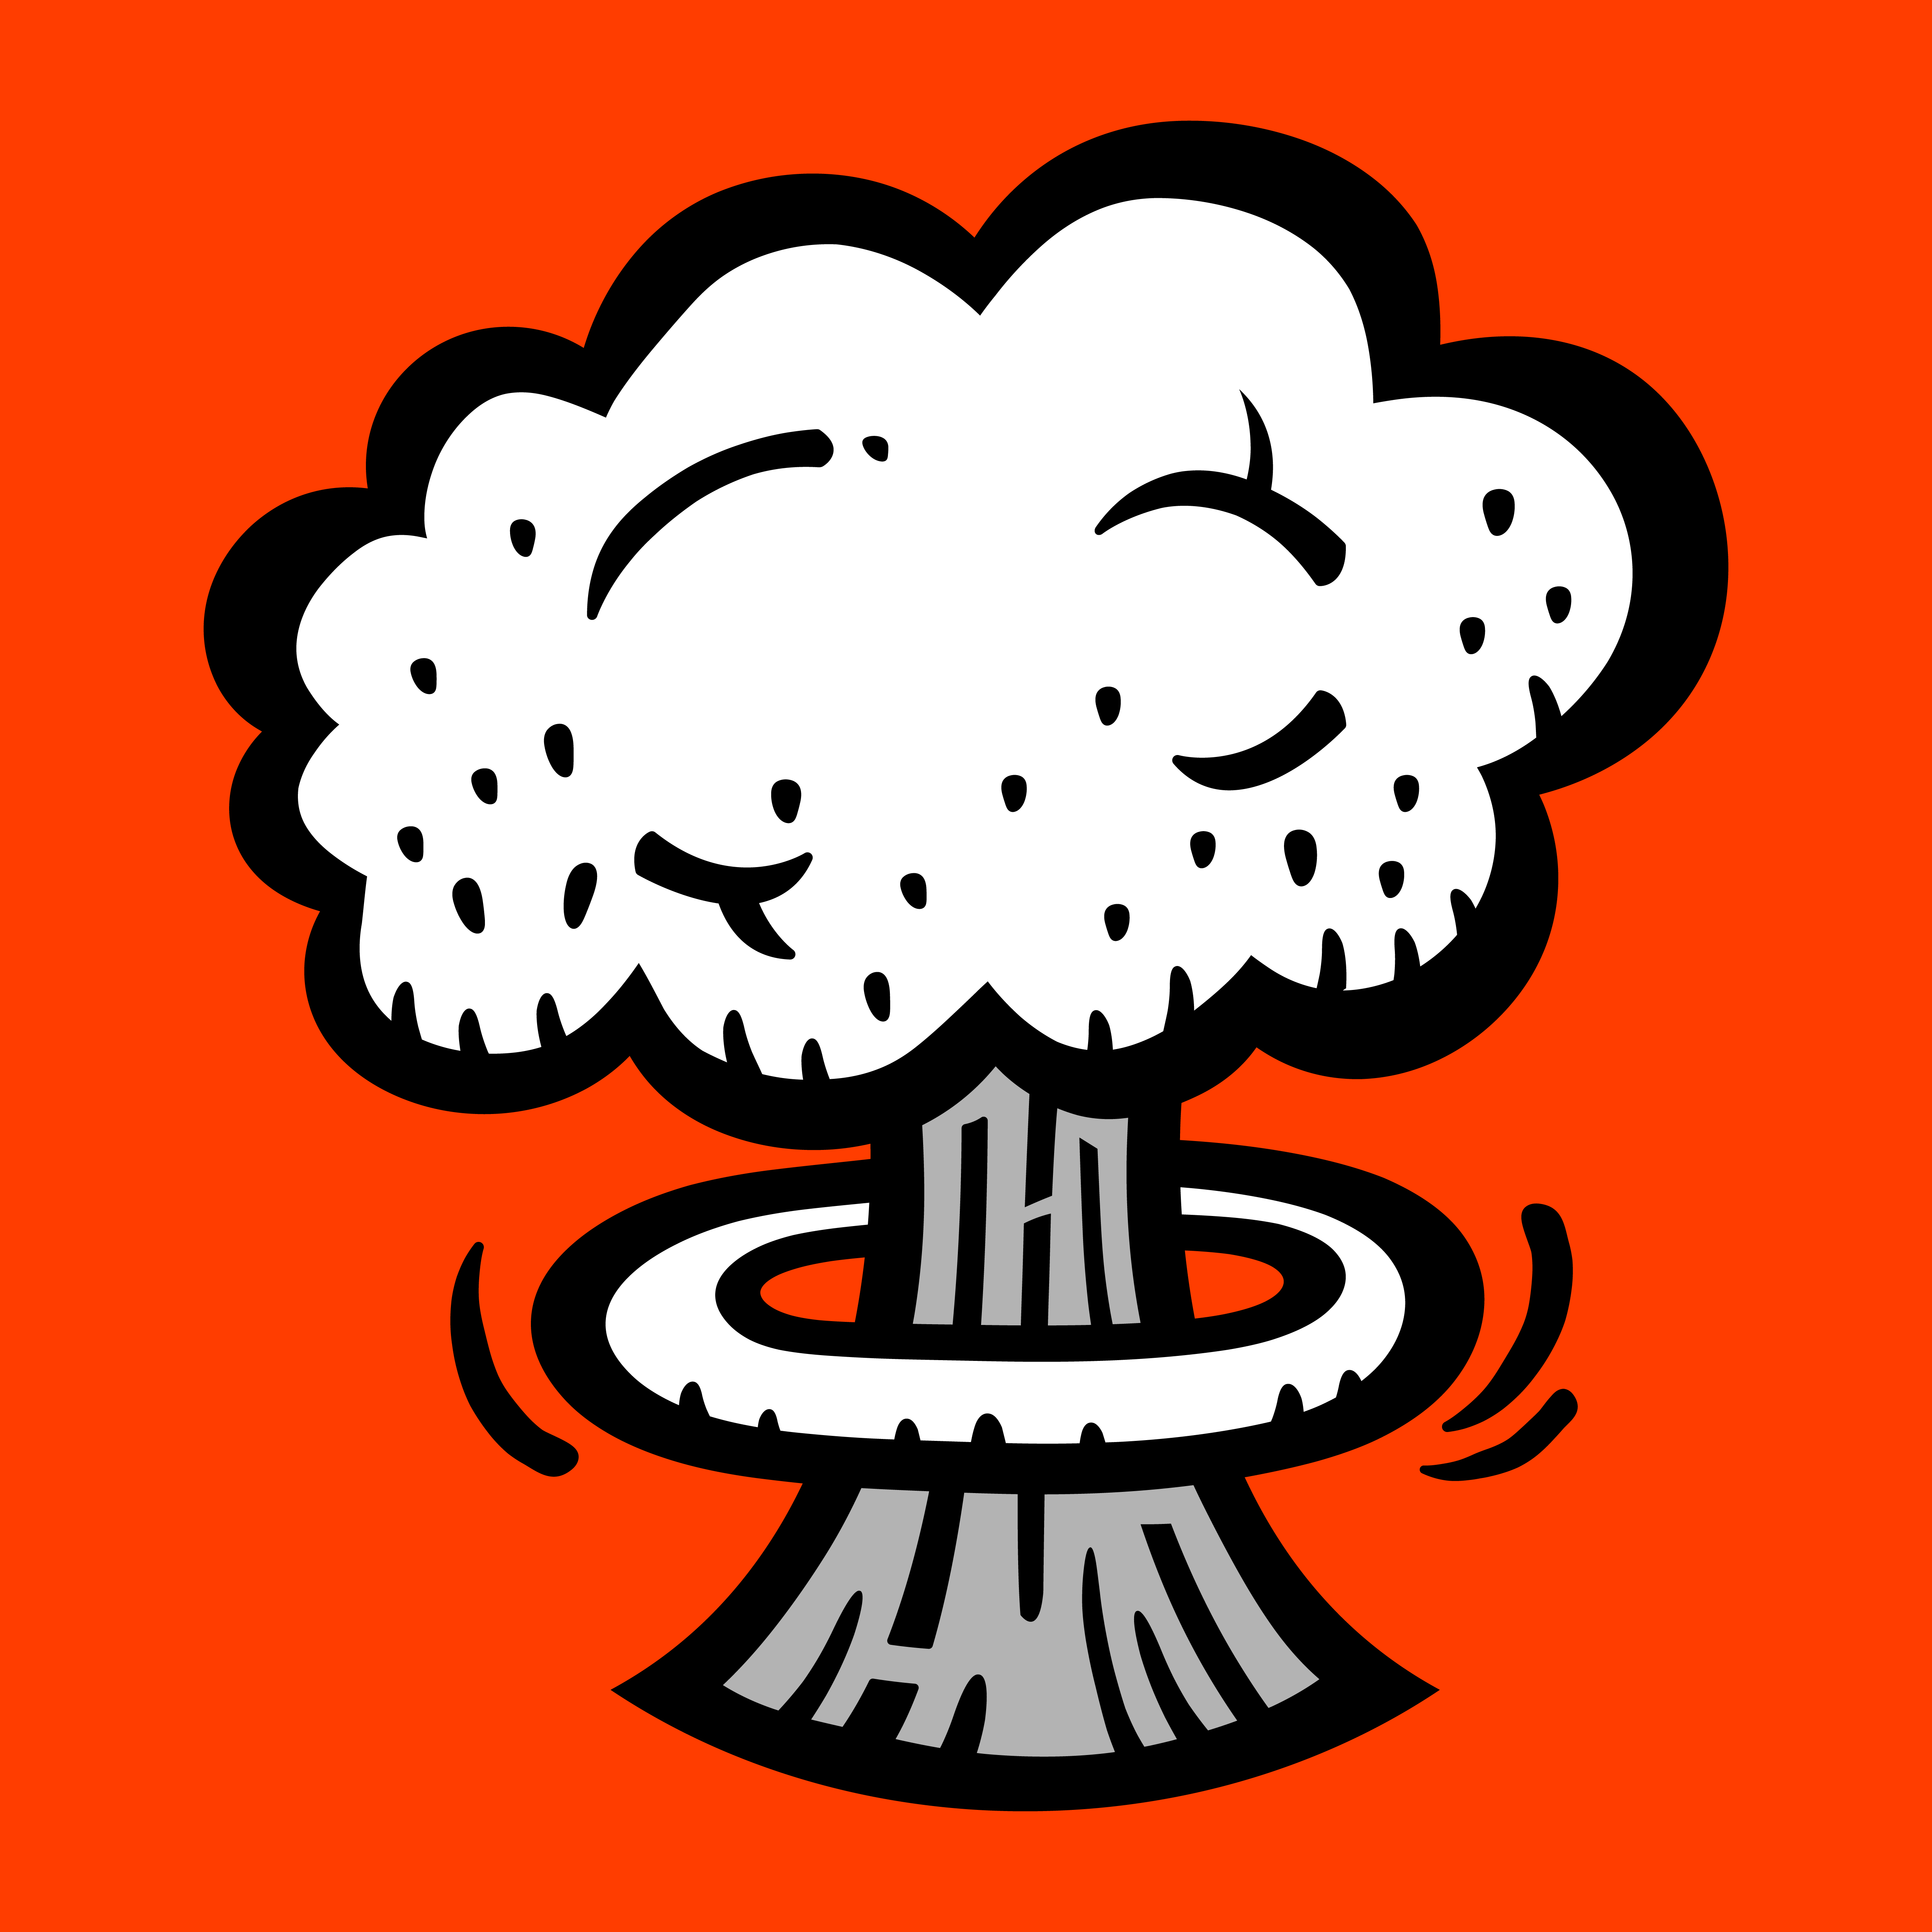 Mushroom Cloud Atomic Nuclear Bomb Explosion Fallout vector icon 551869  Vector Art at Vecteezy